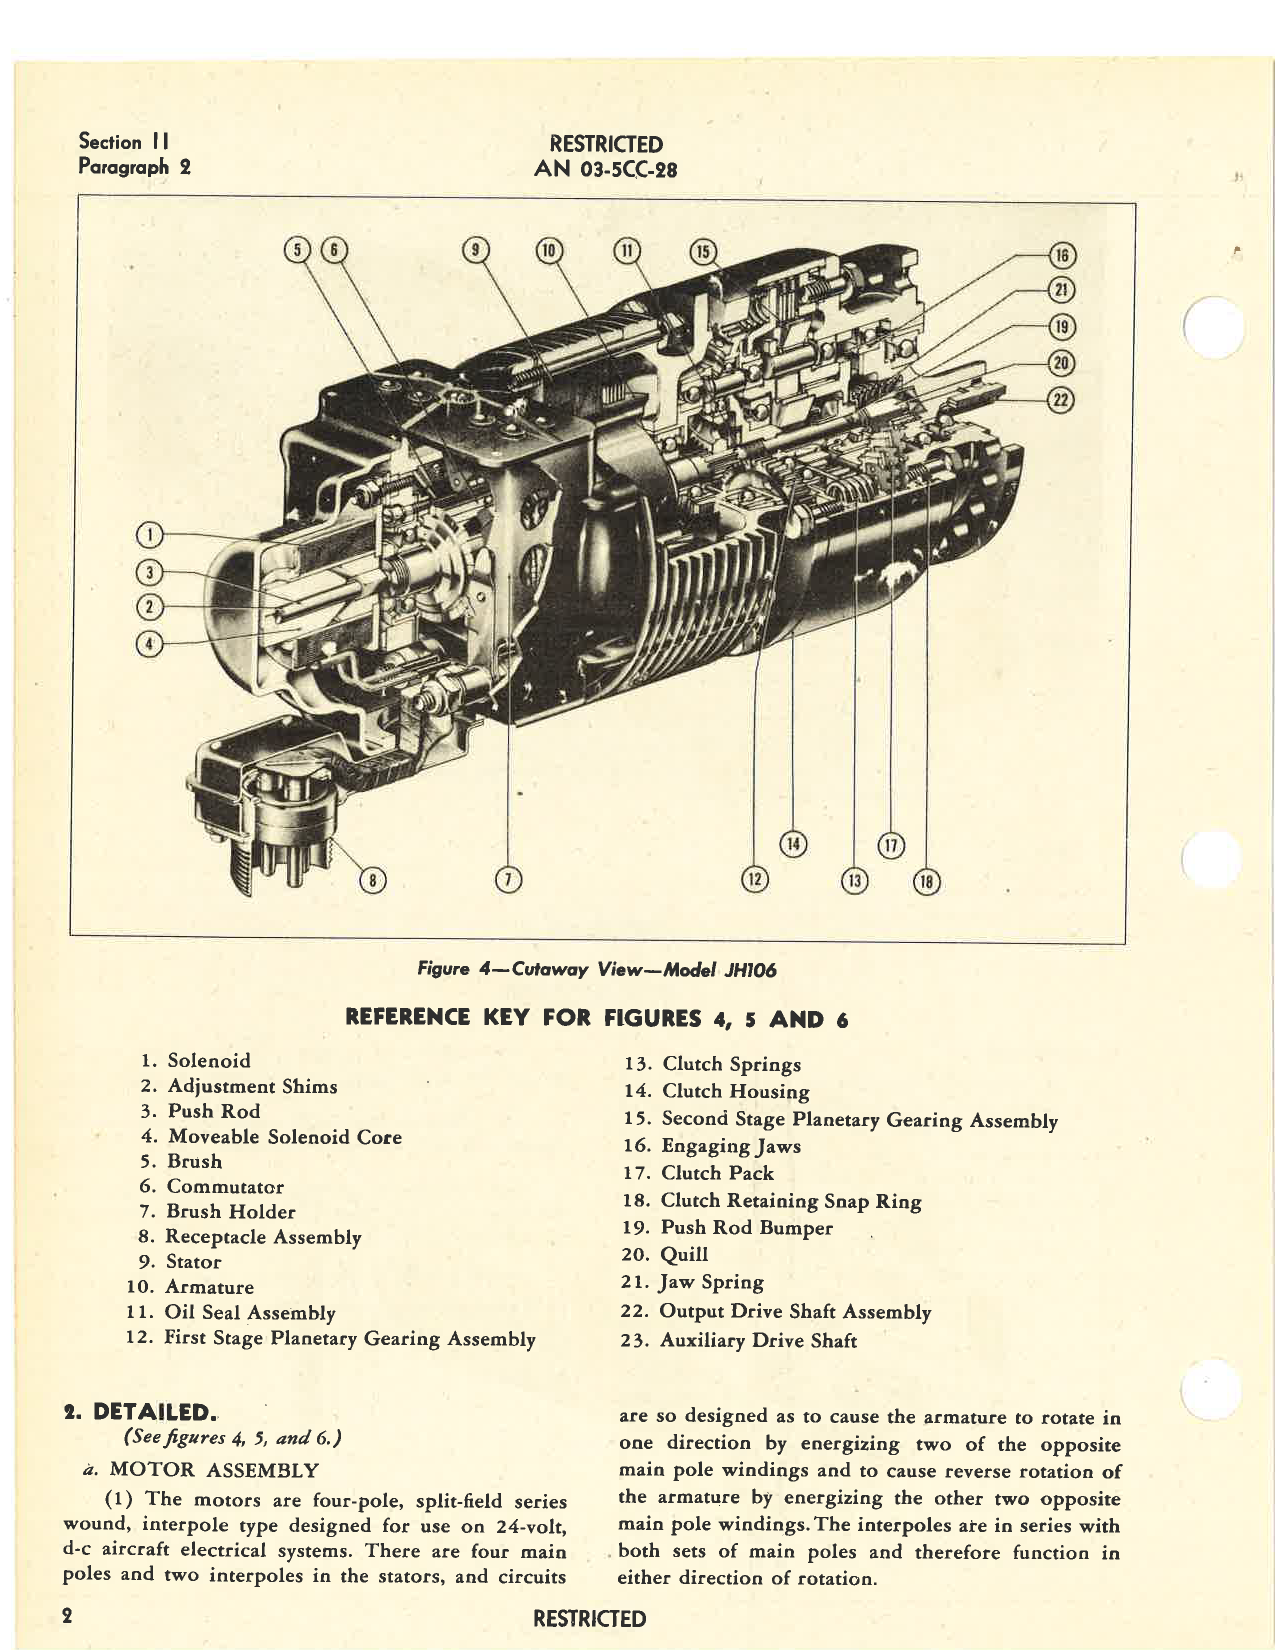 Sample page 6 from AirCorps Library document: Handbook of Instructions with Parts Catalog for Retracting Motors Models JH106, JH107, and JH108